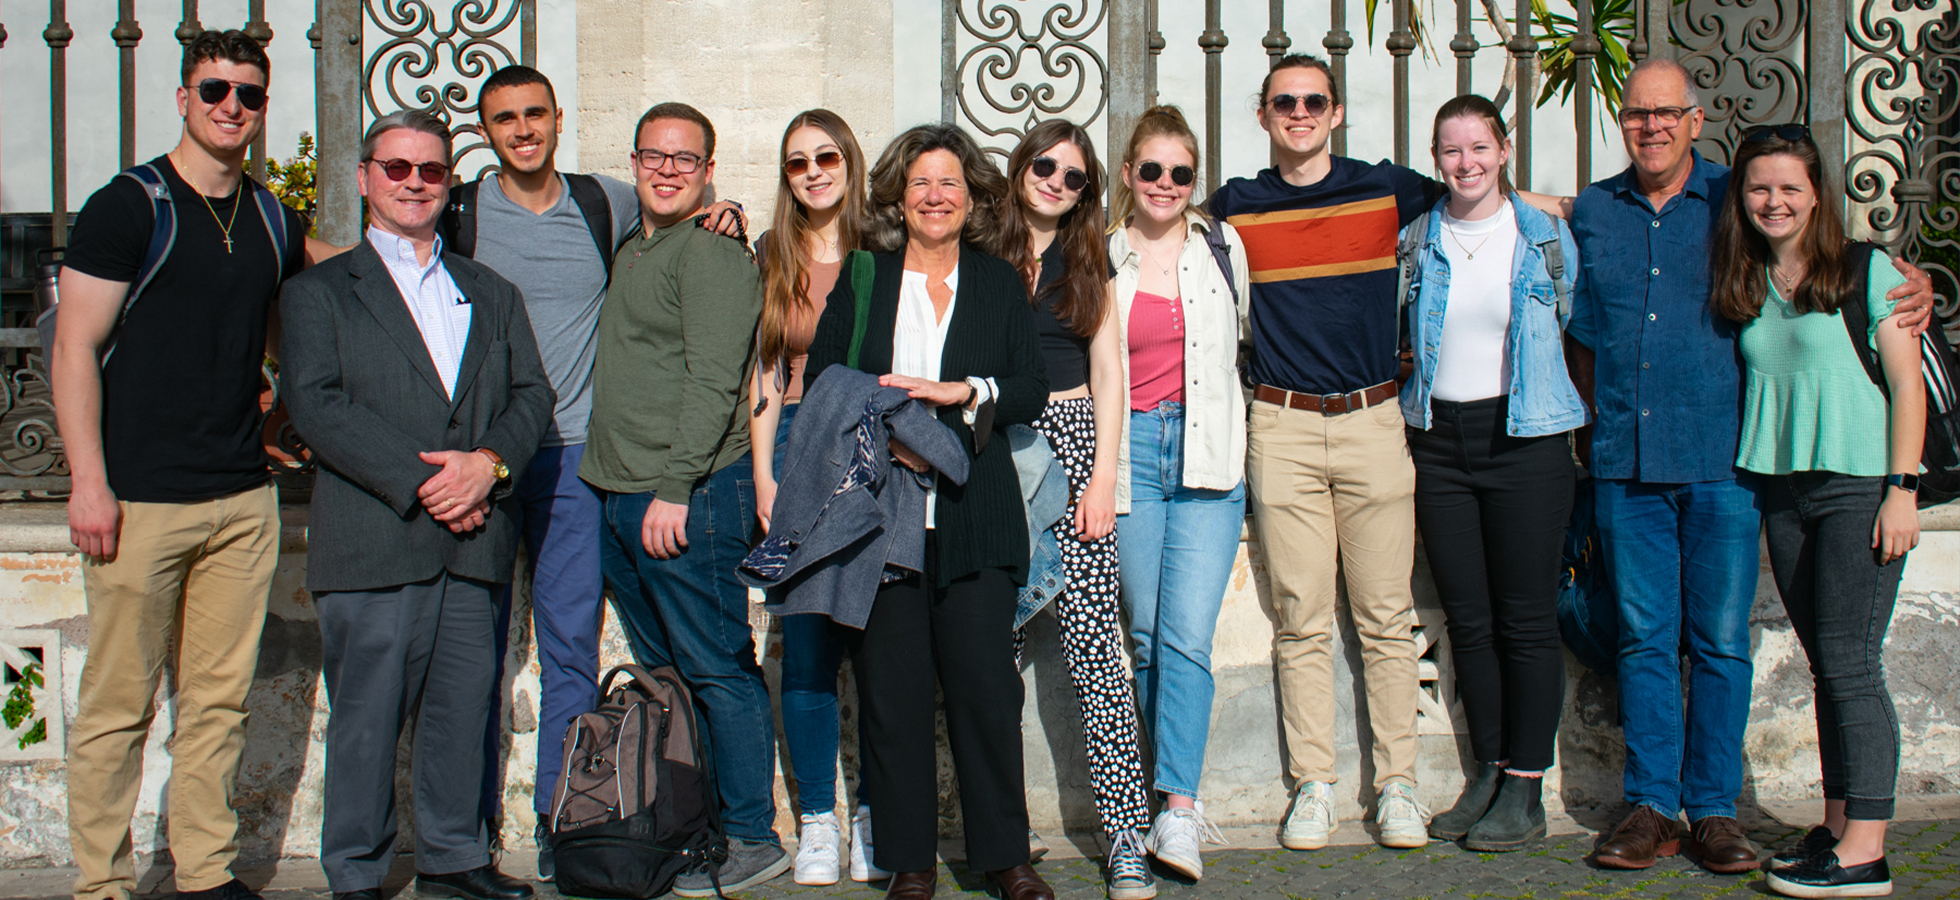 Assumption University students in Italy